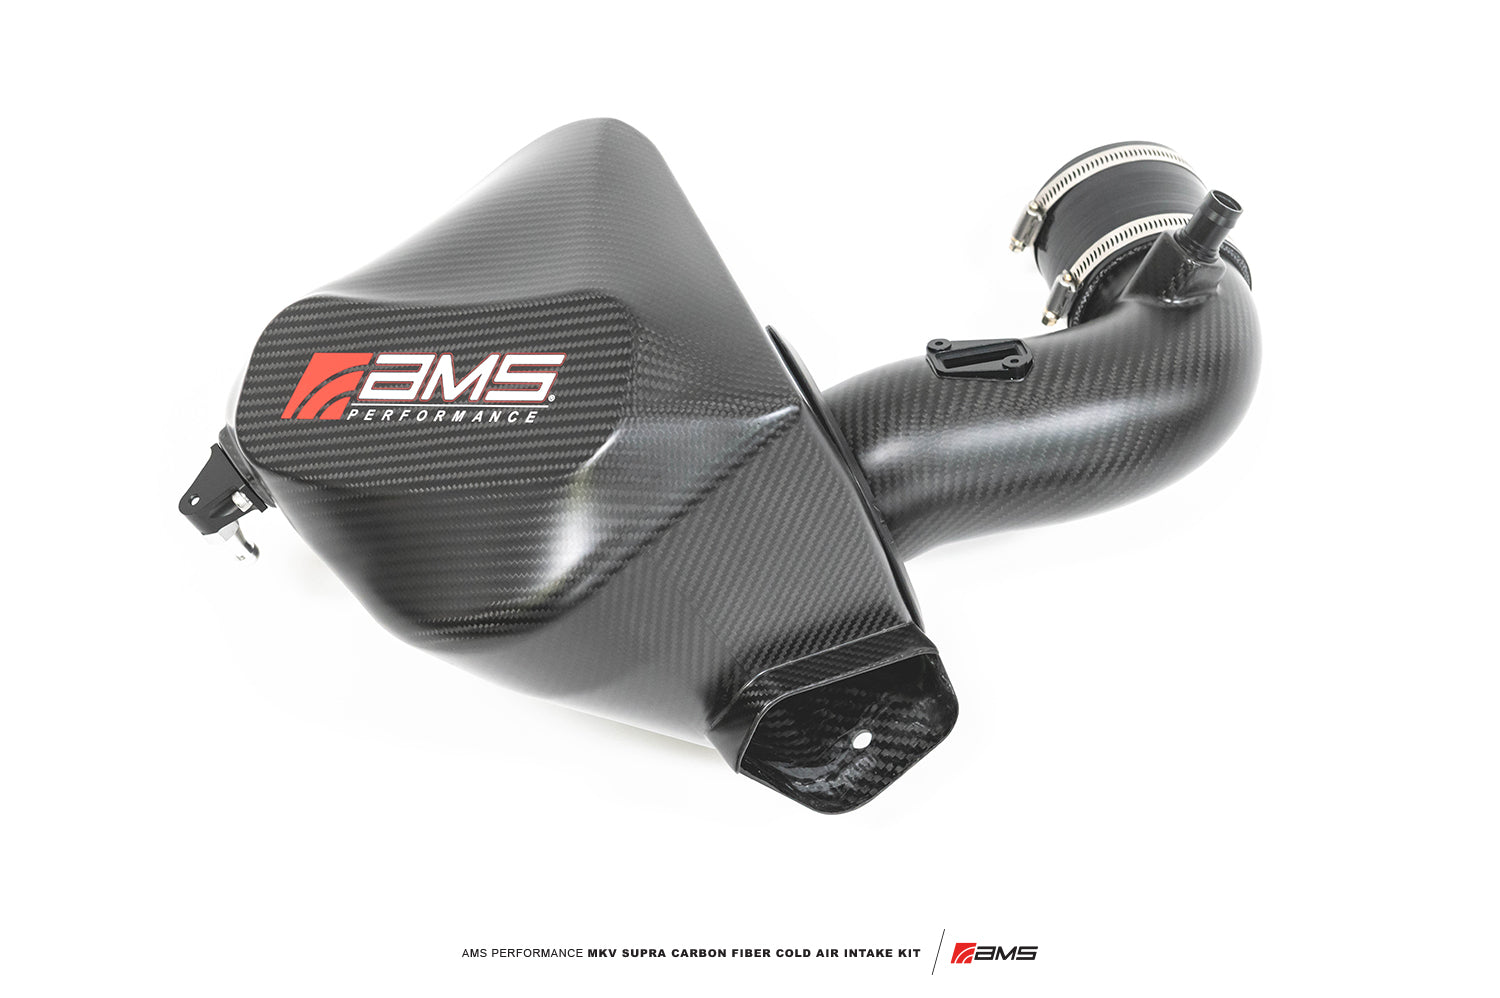 AMS Performance 2020+ Toyota Supra A90 Carbon Fiber Cold Air Intake System for the MK5 Toyota Supra GR A90 MKV - Product Overview